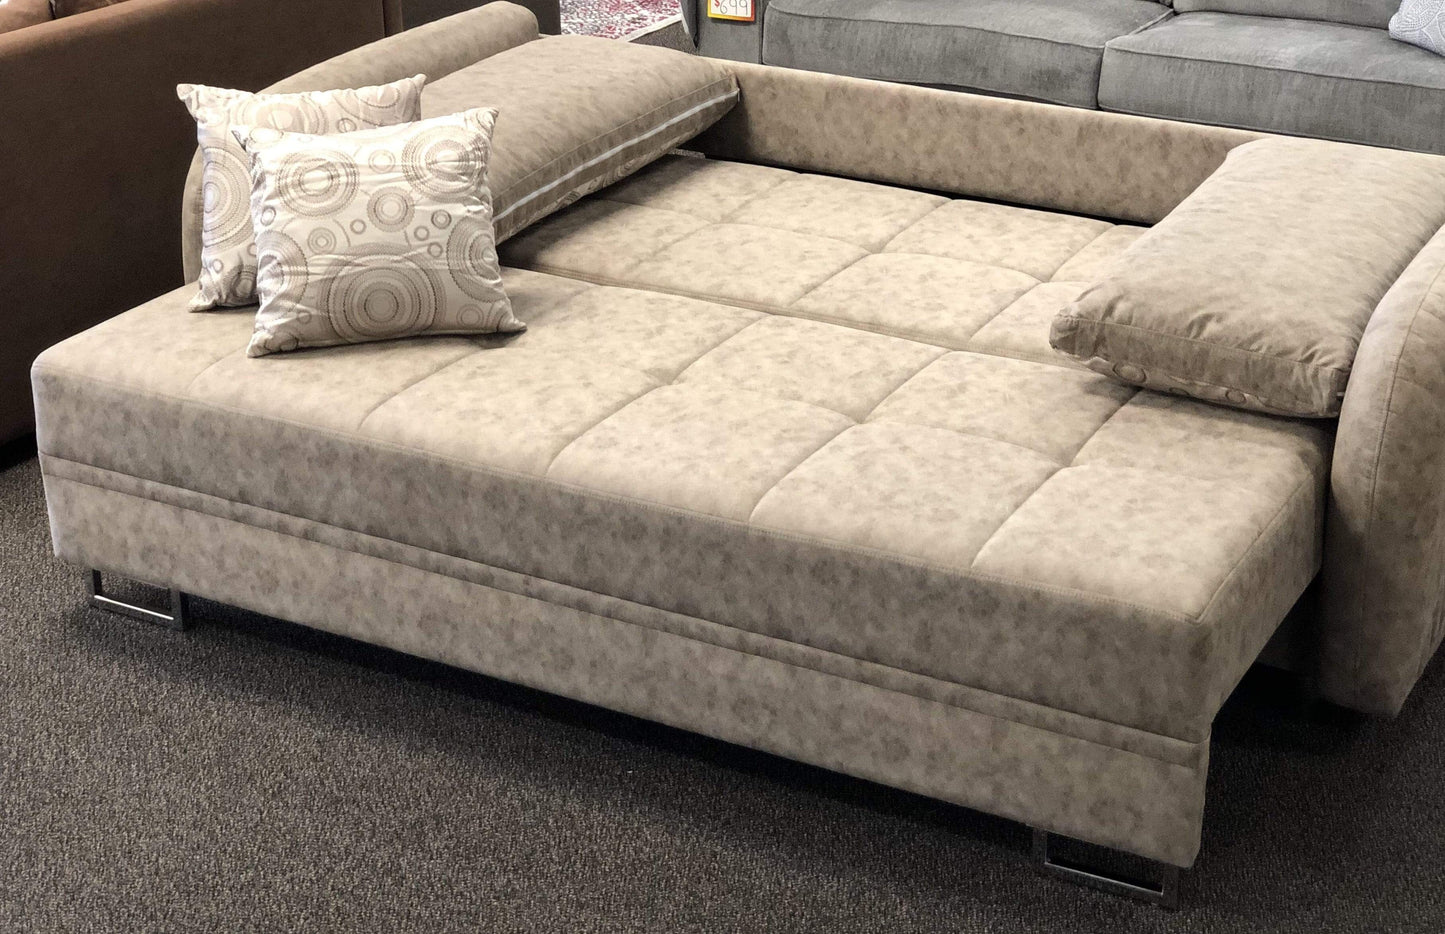 Barcelona Full Size Sofa Bed Sleeper With Storage